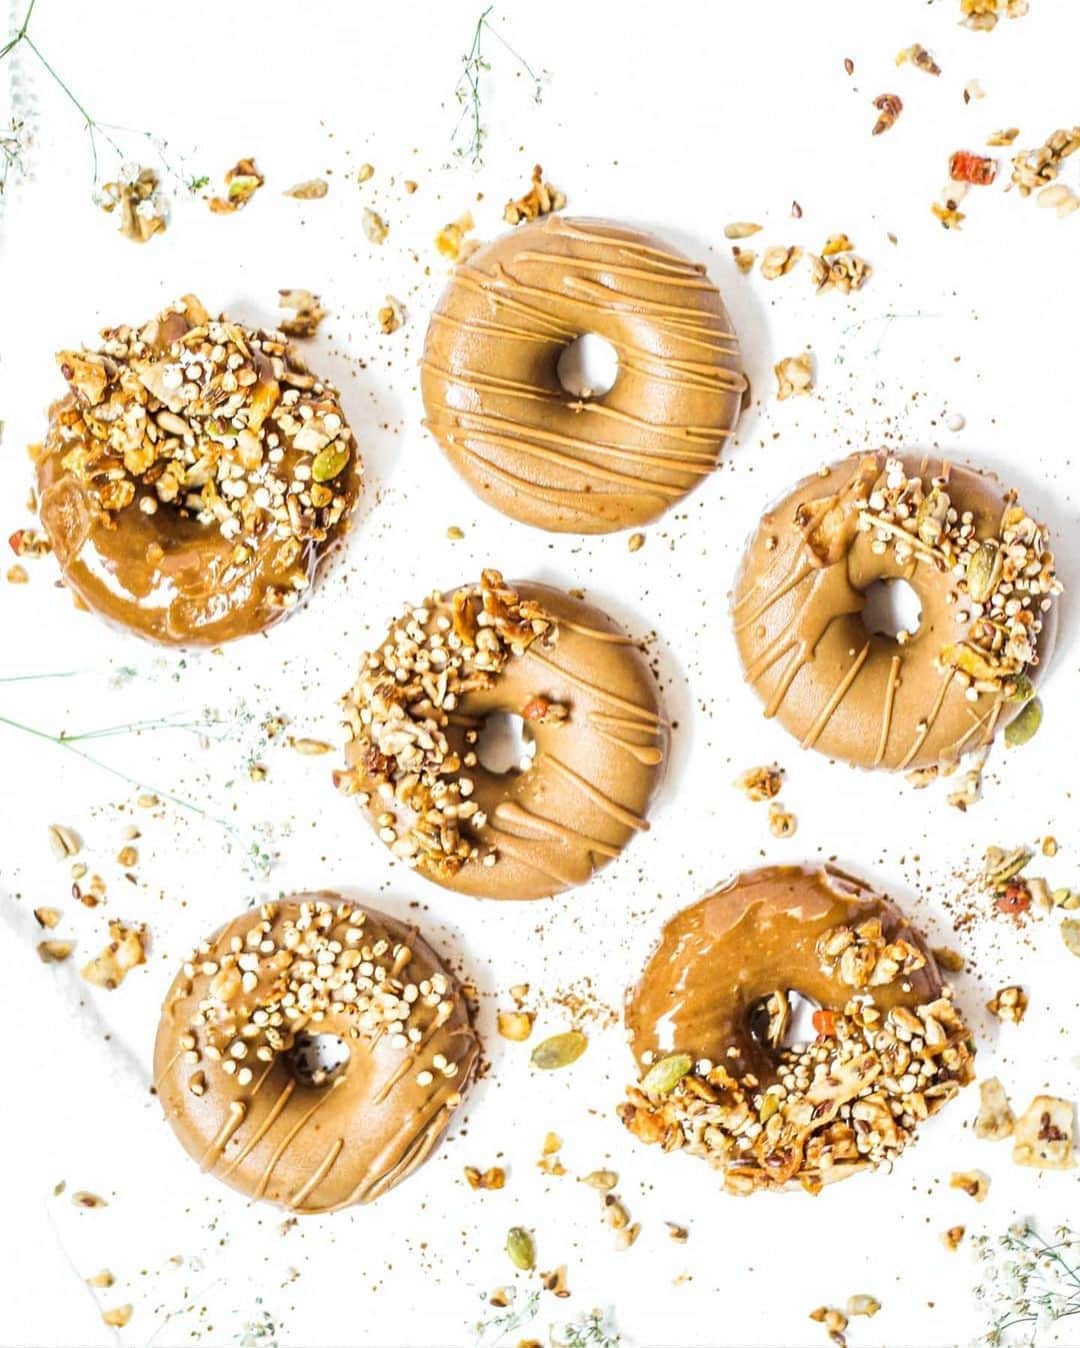 Vitamix Global Headquarters Real foodさんのインスタグラム写真 - (Vitamix Global Headquarters Real foodInstagram)「A feel-good recipe for your Wednesday 🍩 • 📸 + recipe by: @sammybeasley1 • Makes 6-8 donuts 🍩⠀ INGREDIENTS:⠀ ▪︎ Just under 1 cup dates (soaked for 15 minutes in hot water)⠀ ▪︎ 1 cup desiccated coconut⠀ ▪︎ 3/4 cup almond meal⠀ ▪︎ Pinch of cinnamon and salt⠀ ▪︎ 1/4 cup macr0mike salted vanilla protein⠀ ▪︎ 1/2 tsp vanilla⠀ ▪︎ 1 tsp maca powder (optional)⠀ ▪︎ 1/4 cup peanut butter⠀ ▪︎ 1-2 TBS almond milk ( if required)⠀ ⠀ METHOD:⠀ 1. Pulse all the ingredients in a food processor or Vitamix until a soft dough forms. If the mixture appears crumbly, add a TBS of almond milk.⠀ ⠀ 2. Transfer the dough into your silicone donut molds and place in the freezer to set for 1-2 hours. I like to roll the dough into tubes with my hands so I can push it around the molds. ⠀ ⠀ 3. Once they are set, coat in melted salted caramel chocolate and transfer to a lined baking tray. Immediately top with golden granola. Set in the fridge for 20 minutes and enjoy! 🍩⠀ ⠀ *** Note: The donuts are quite sweet so do not use any additional sweetener, you can use fewer dates if you are not a big sweet tooth. • #repost #sammybeasley1 #vitamix #feelgood #wednesday #positivity #recipe #donuts #doughnuts #myvitamix #bakedgoods」8月20日 0時48分 - vitamix